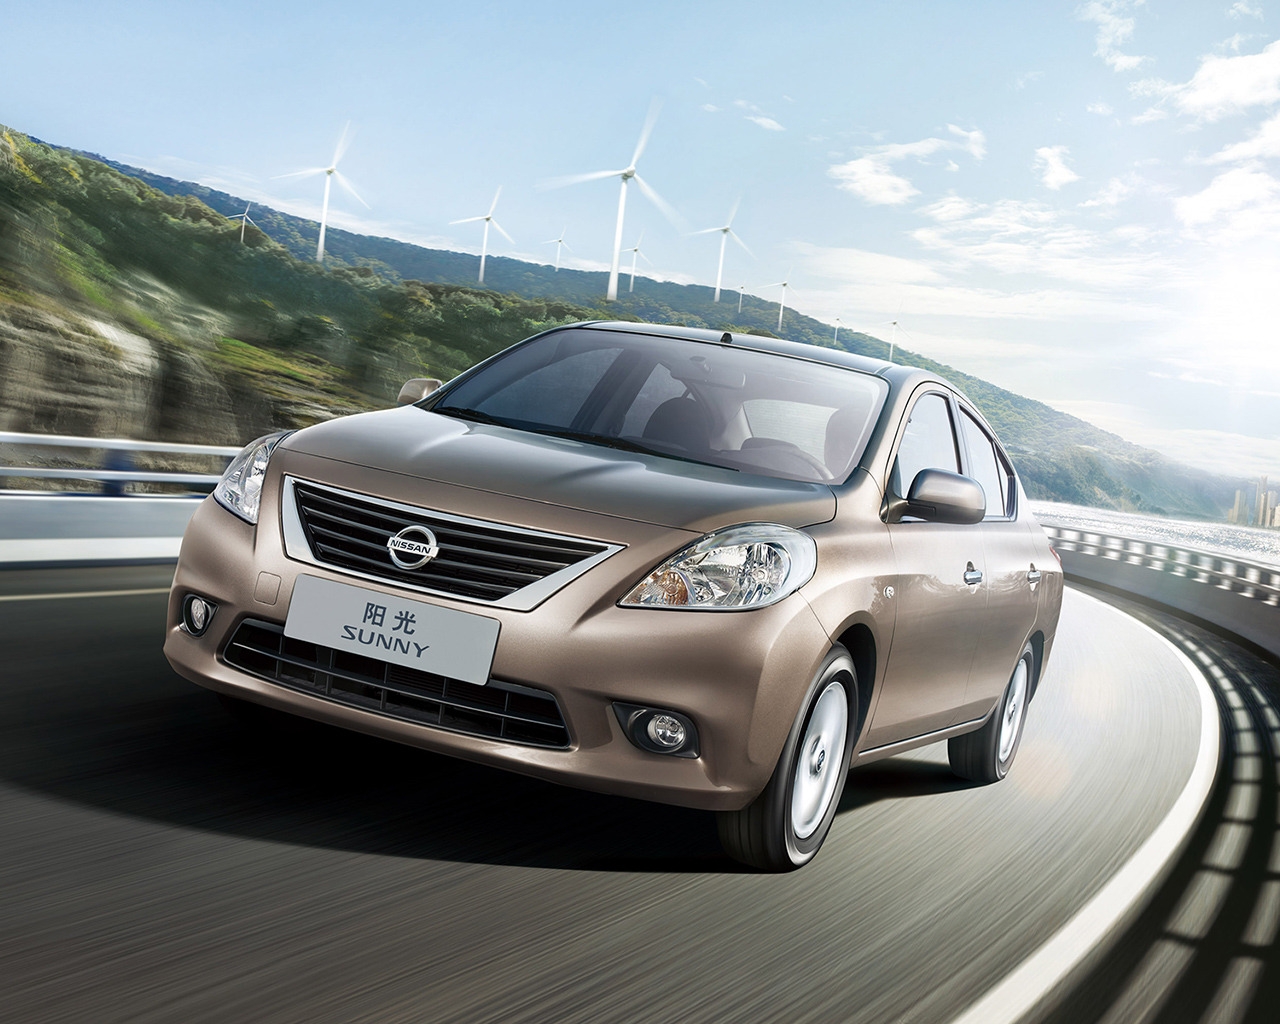 Nissan Sunny 2012 for 1280 x 1024 resolution